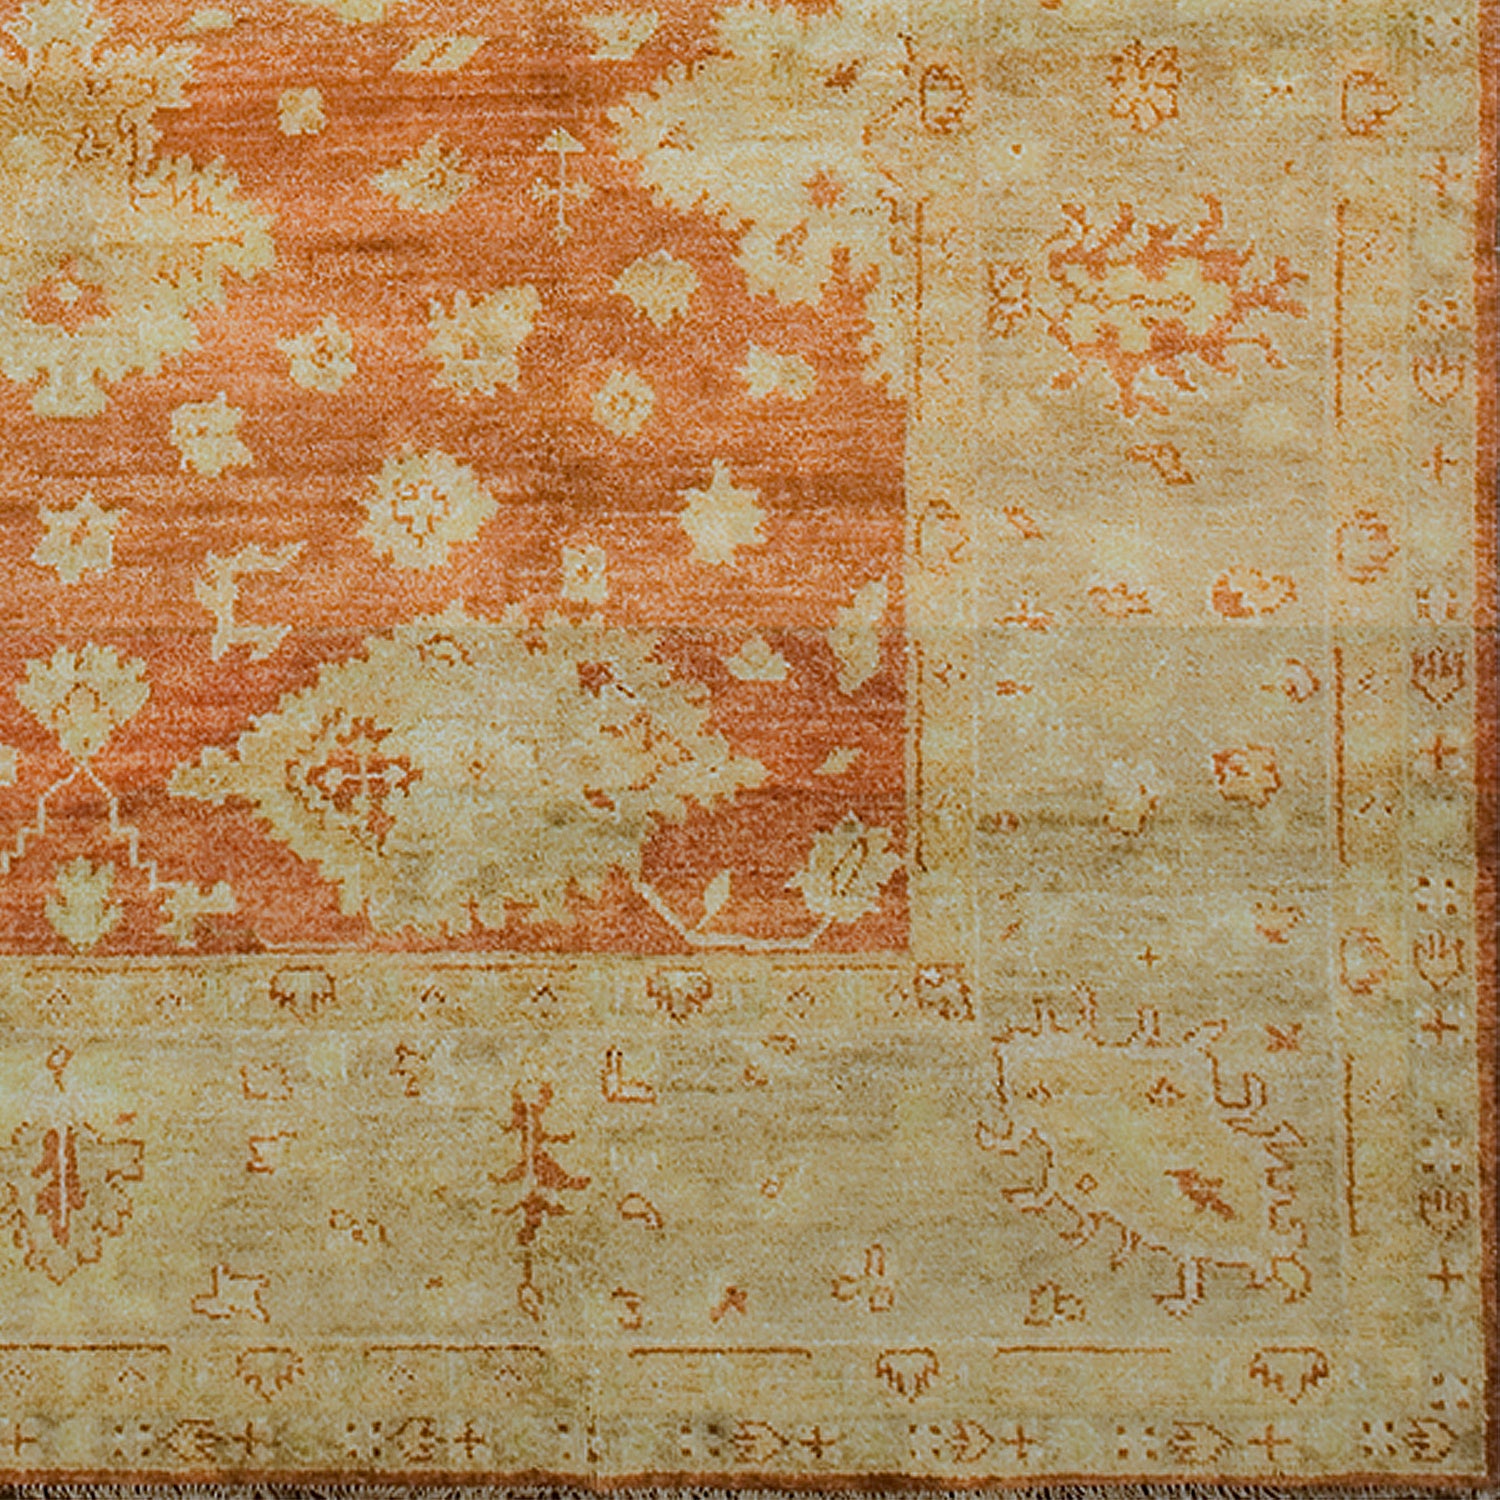 Woven rug swatch with a minimalist floral pattern in tan on a red field, with a tan border of linear florals in red.